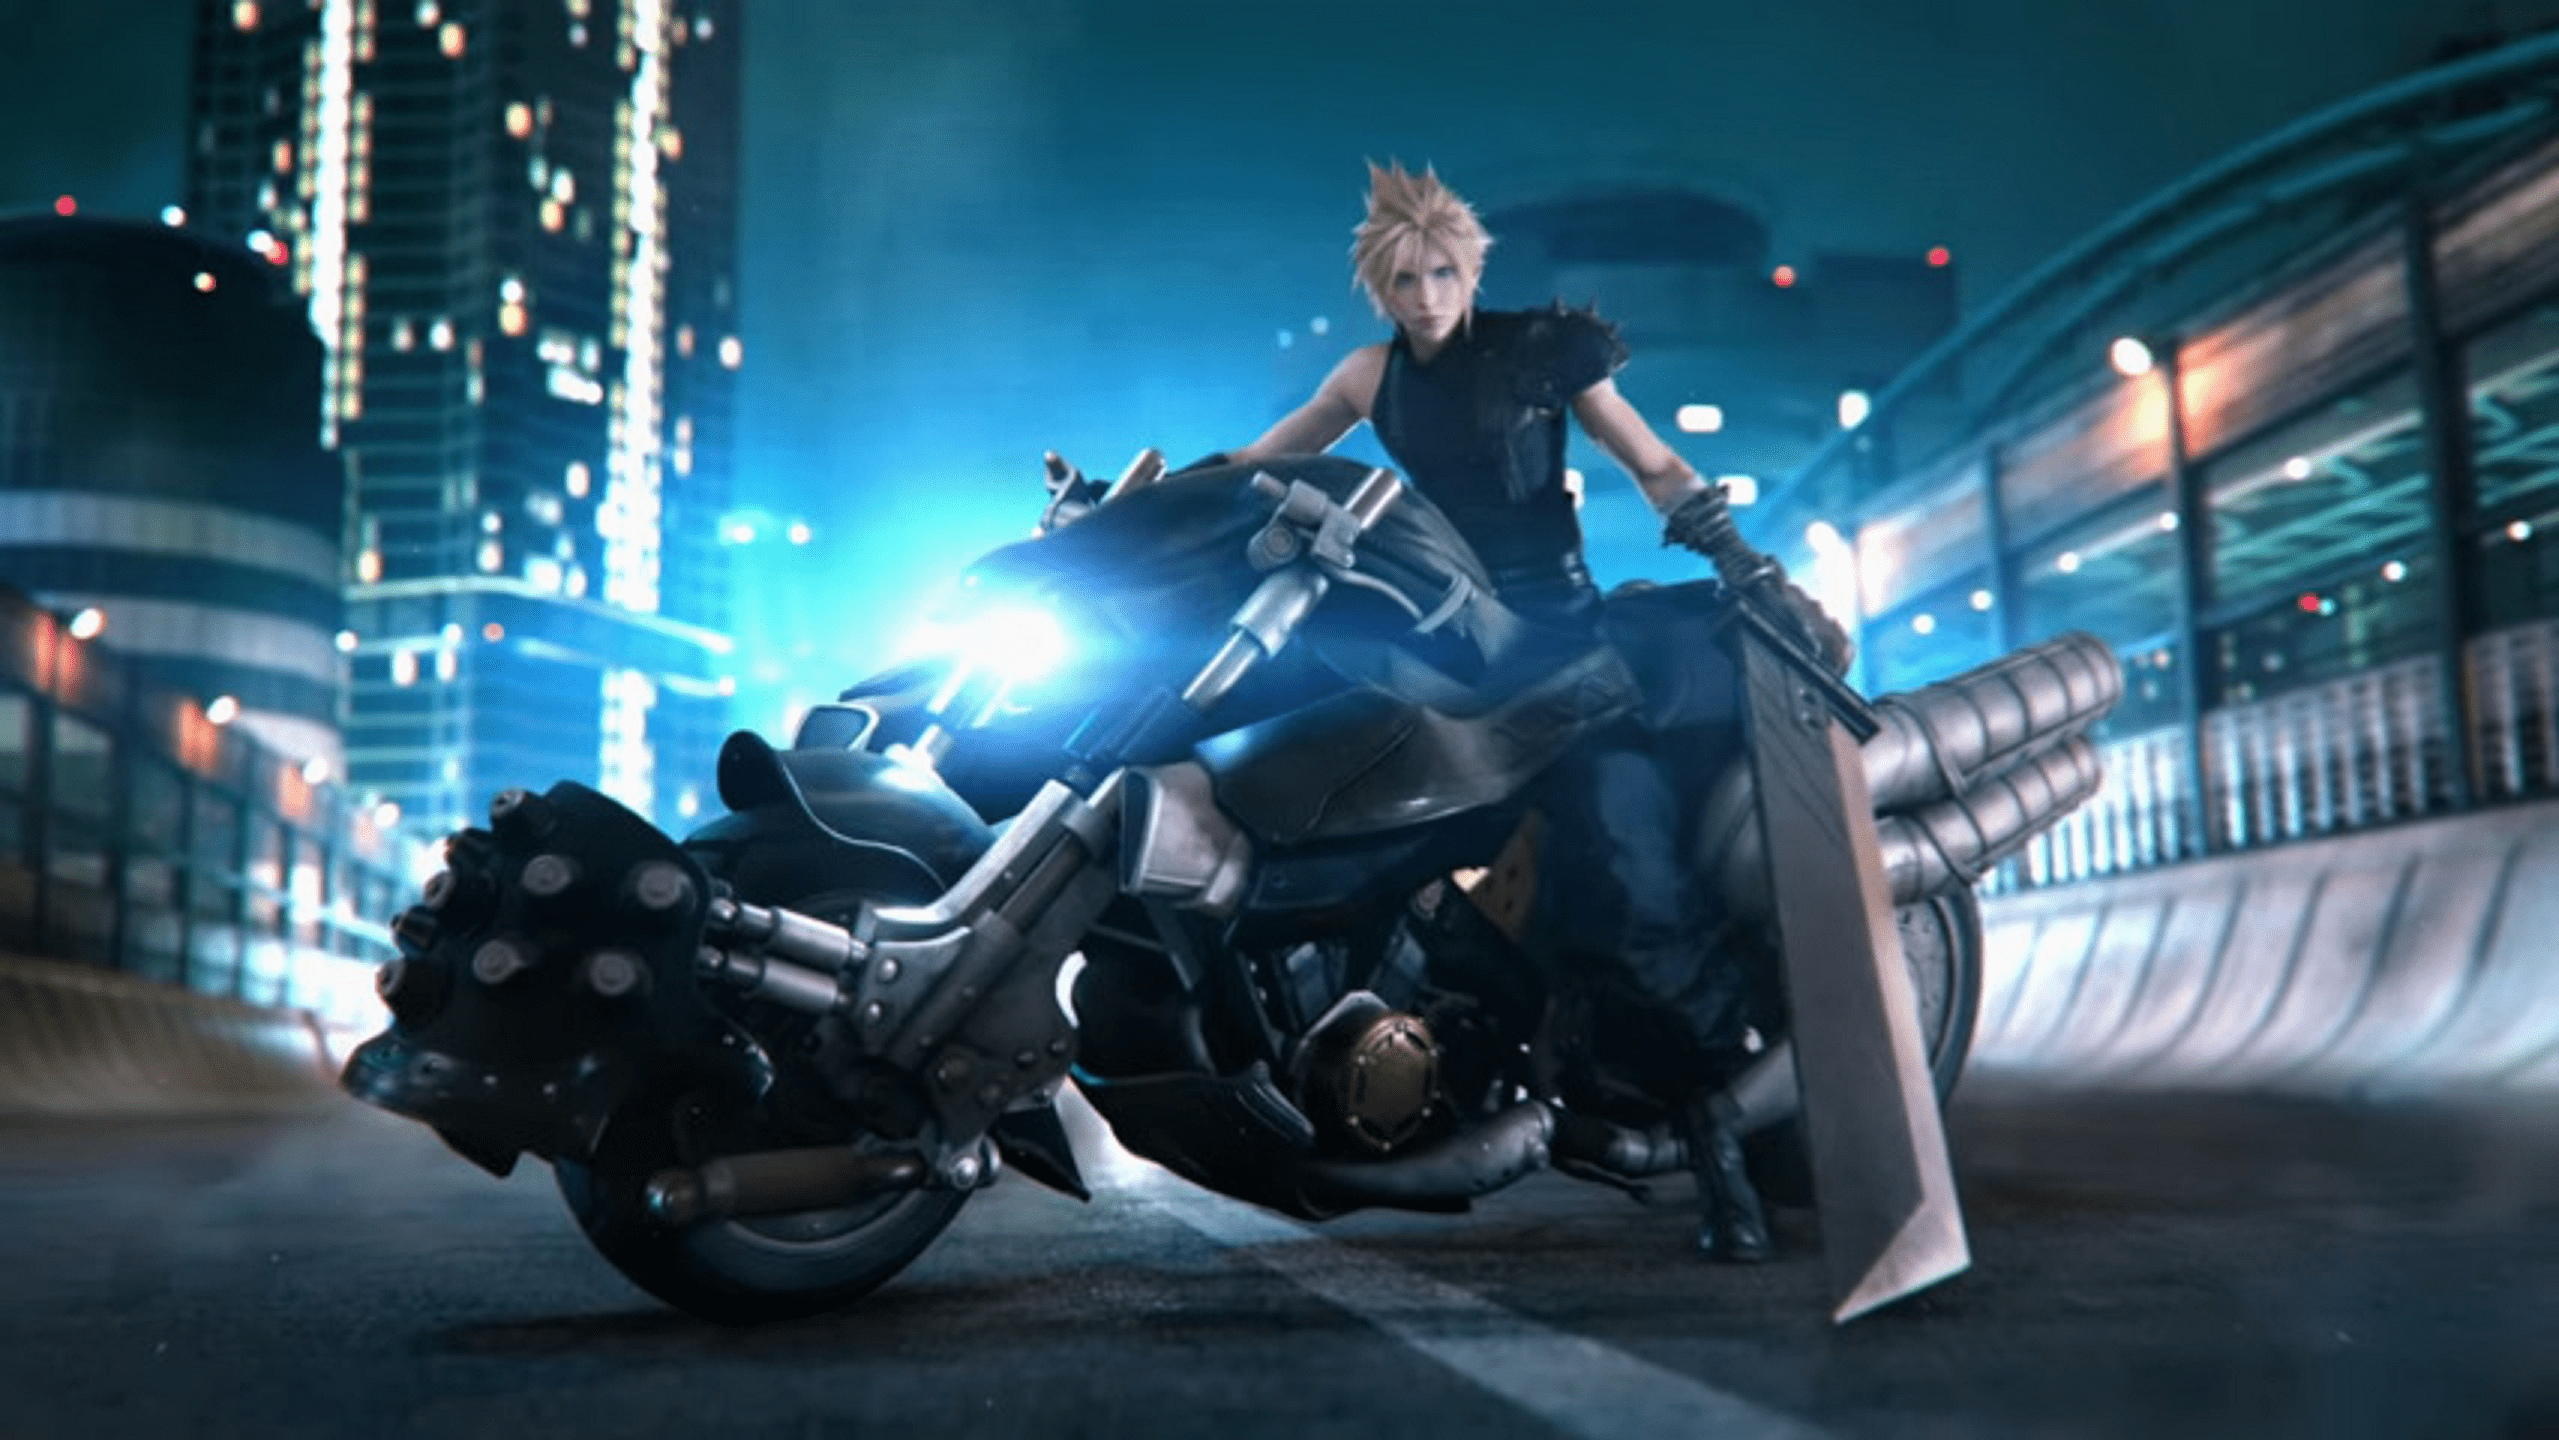 The Final Fantasy VII Remake Playable Demo Has Been Leaked Online By PlayStation Hackers